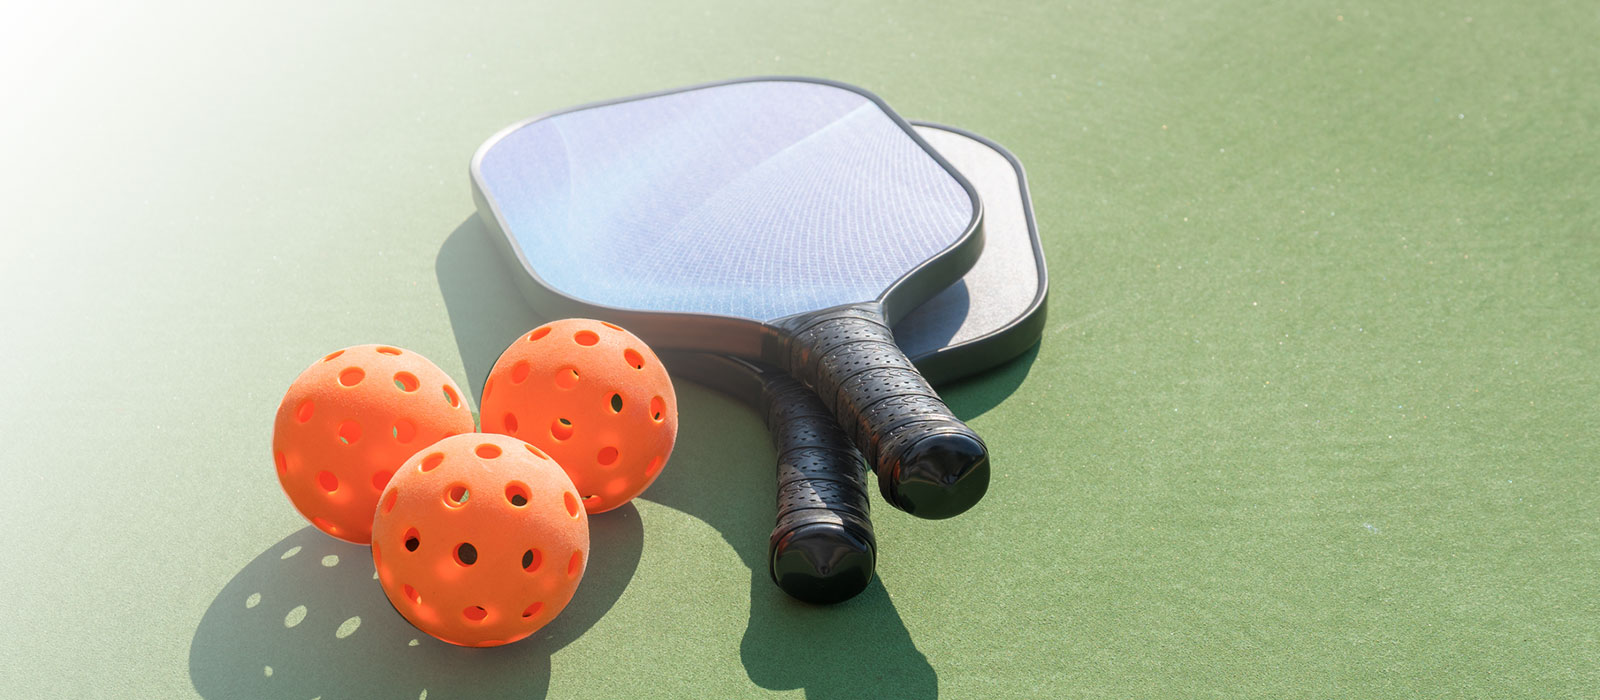 pickleball and racquets on court